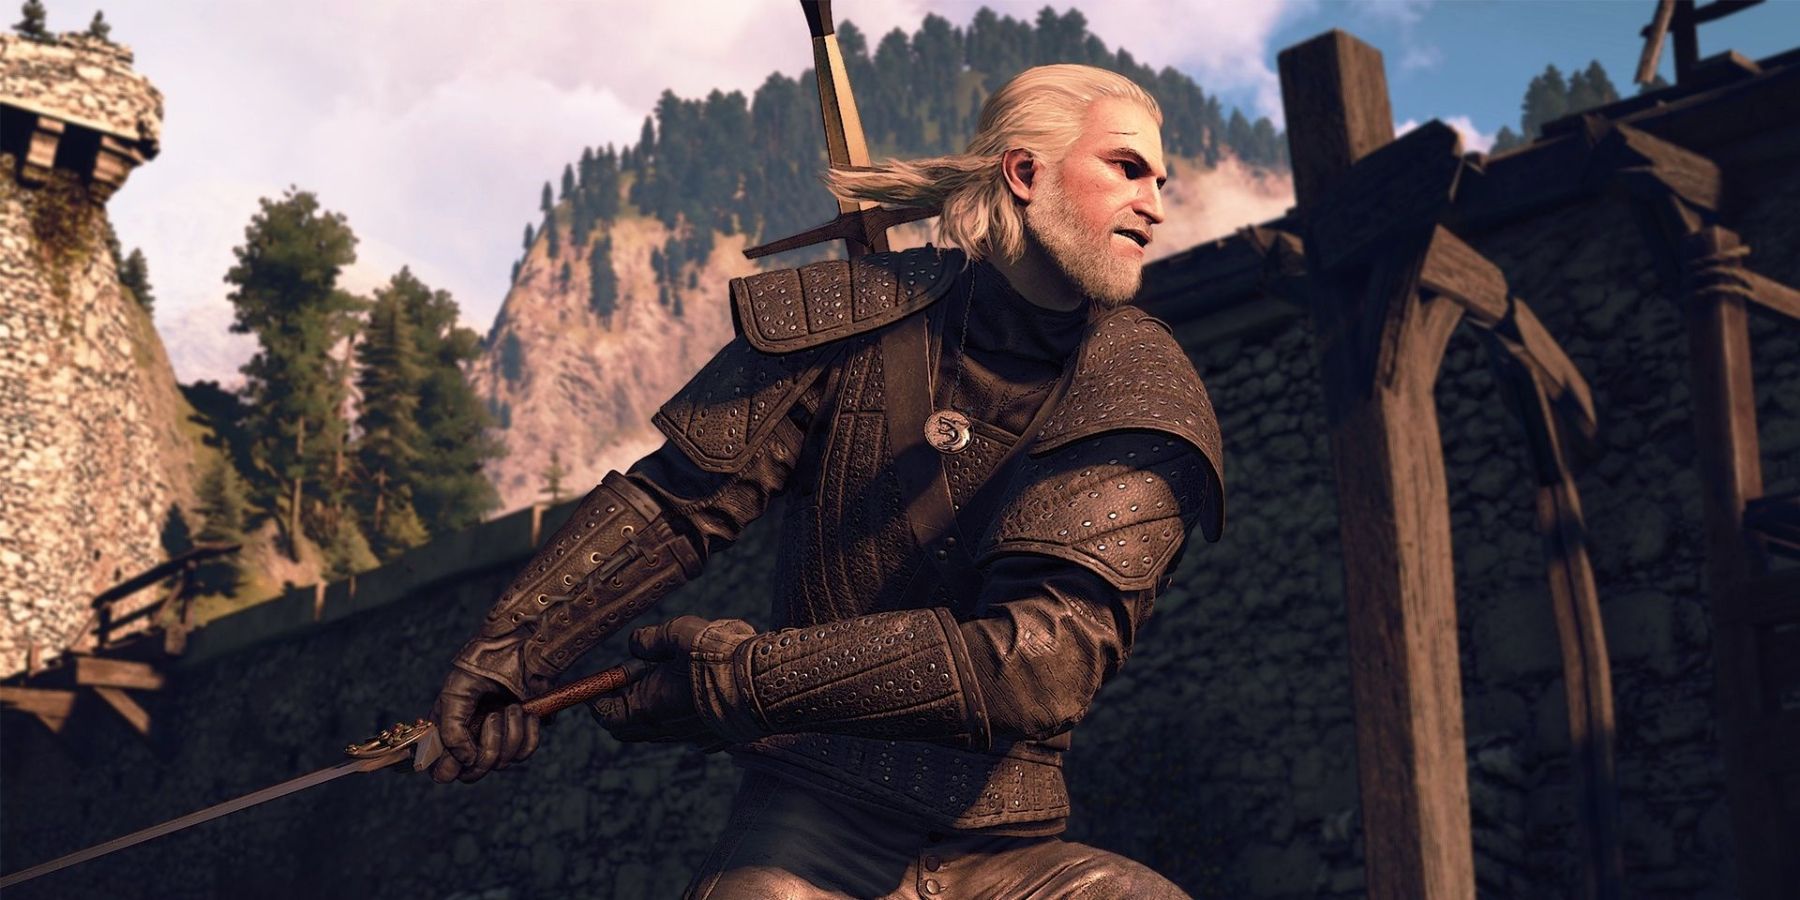 Geralt in The Witcher 3, wearing armor inspired by the Netflix series.